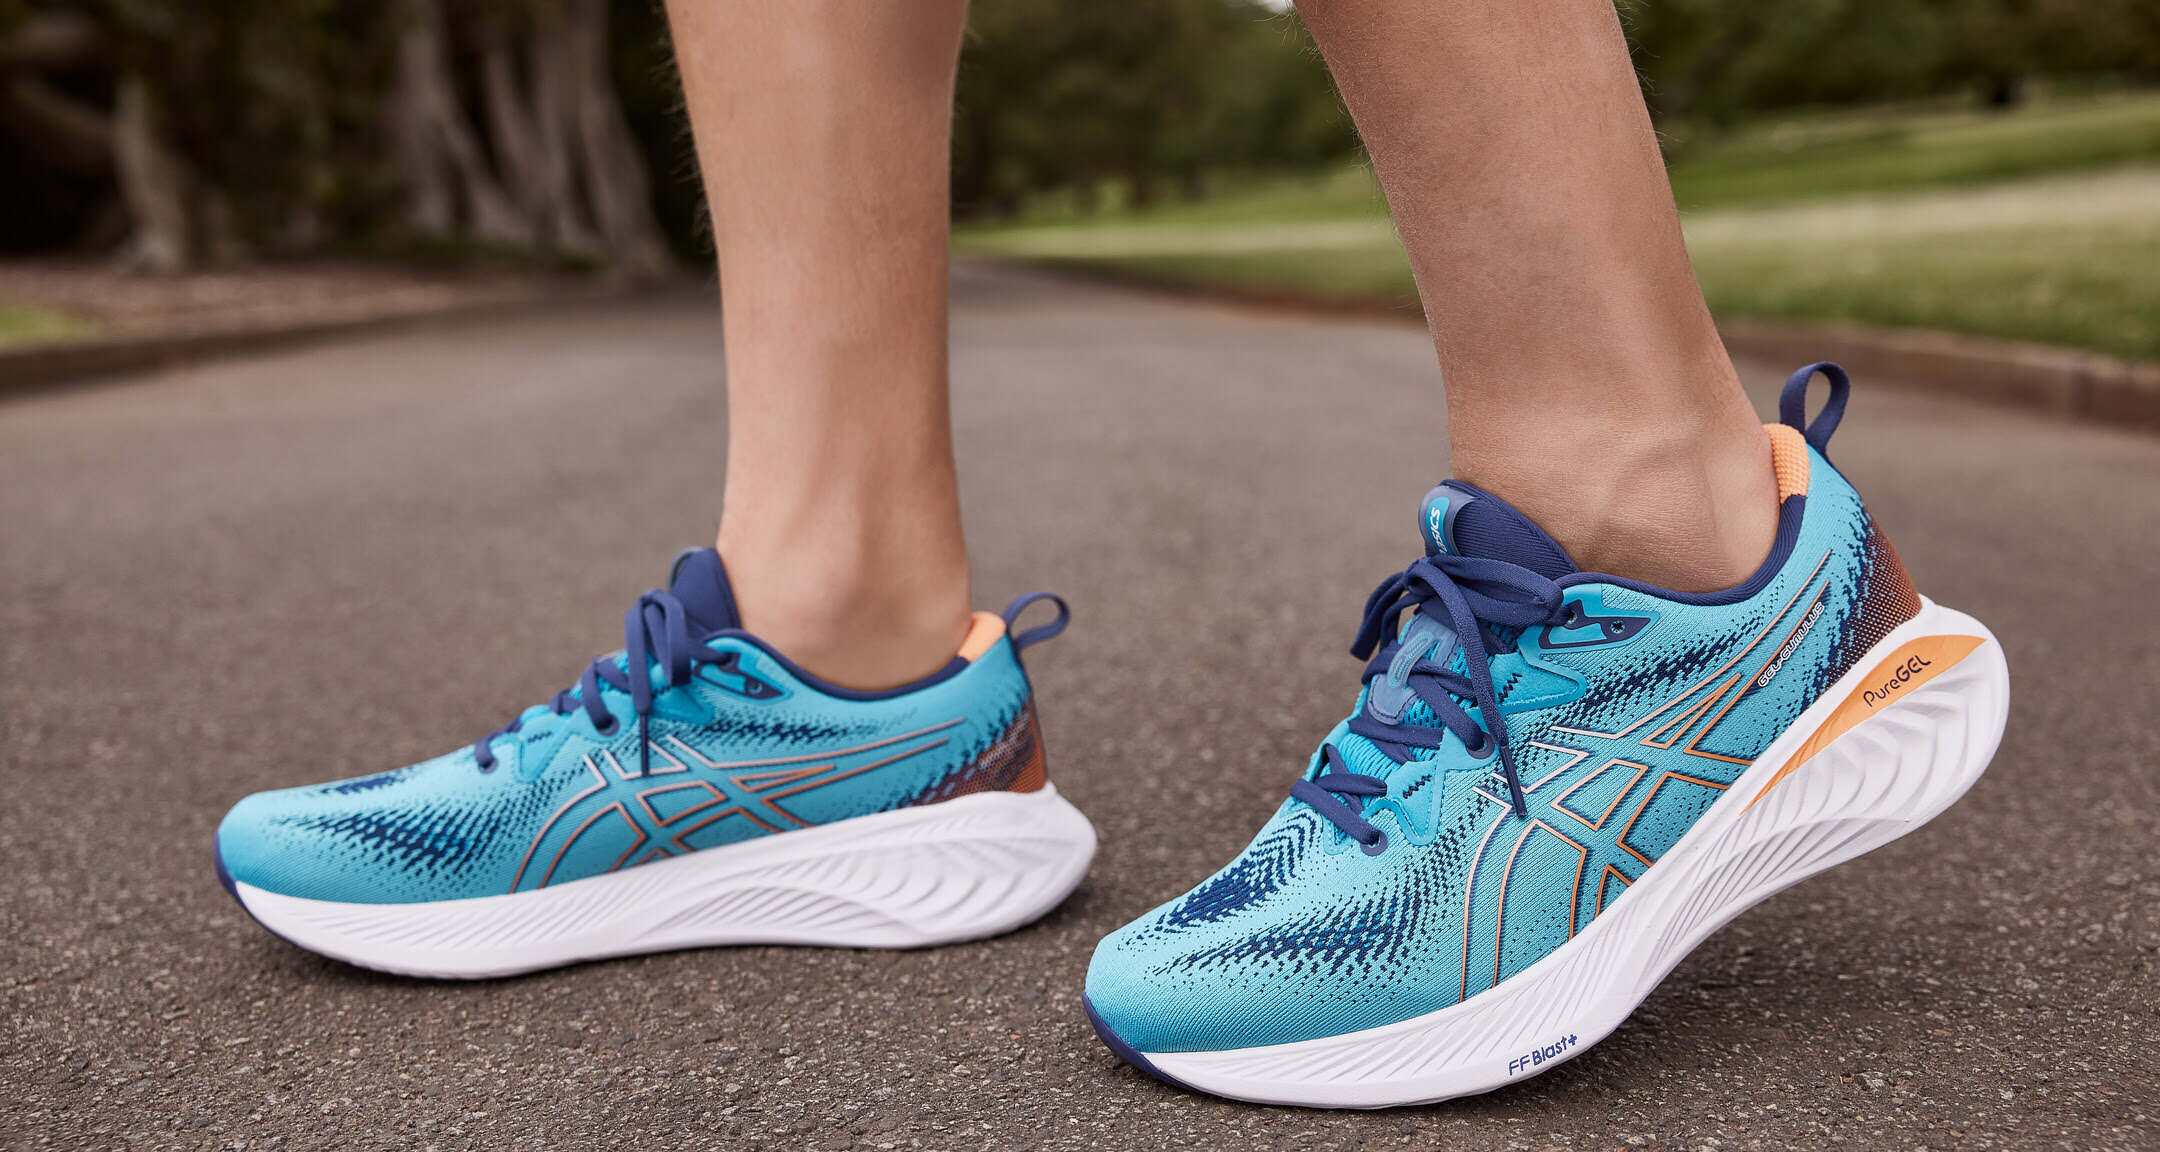 Best Running Shoes for Achilles Tendonitis 2020 - Buyer's Guide